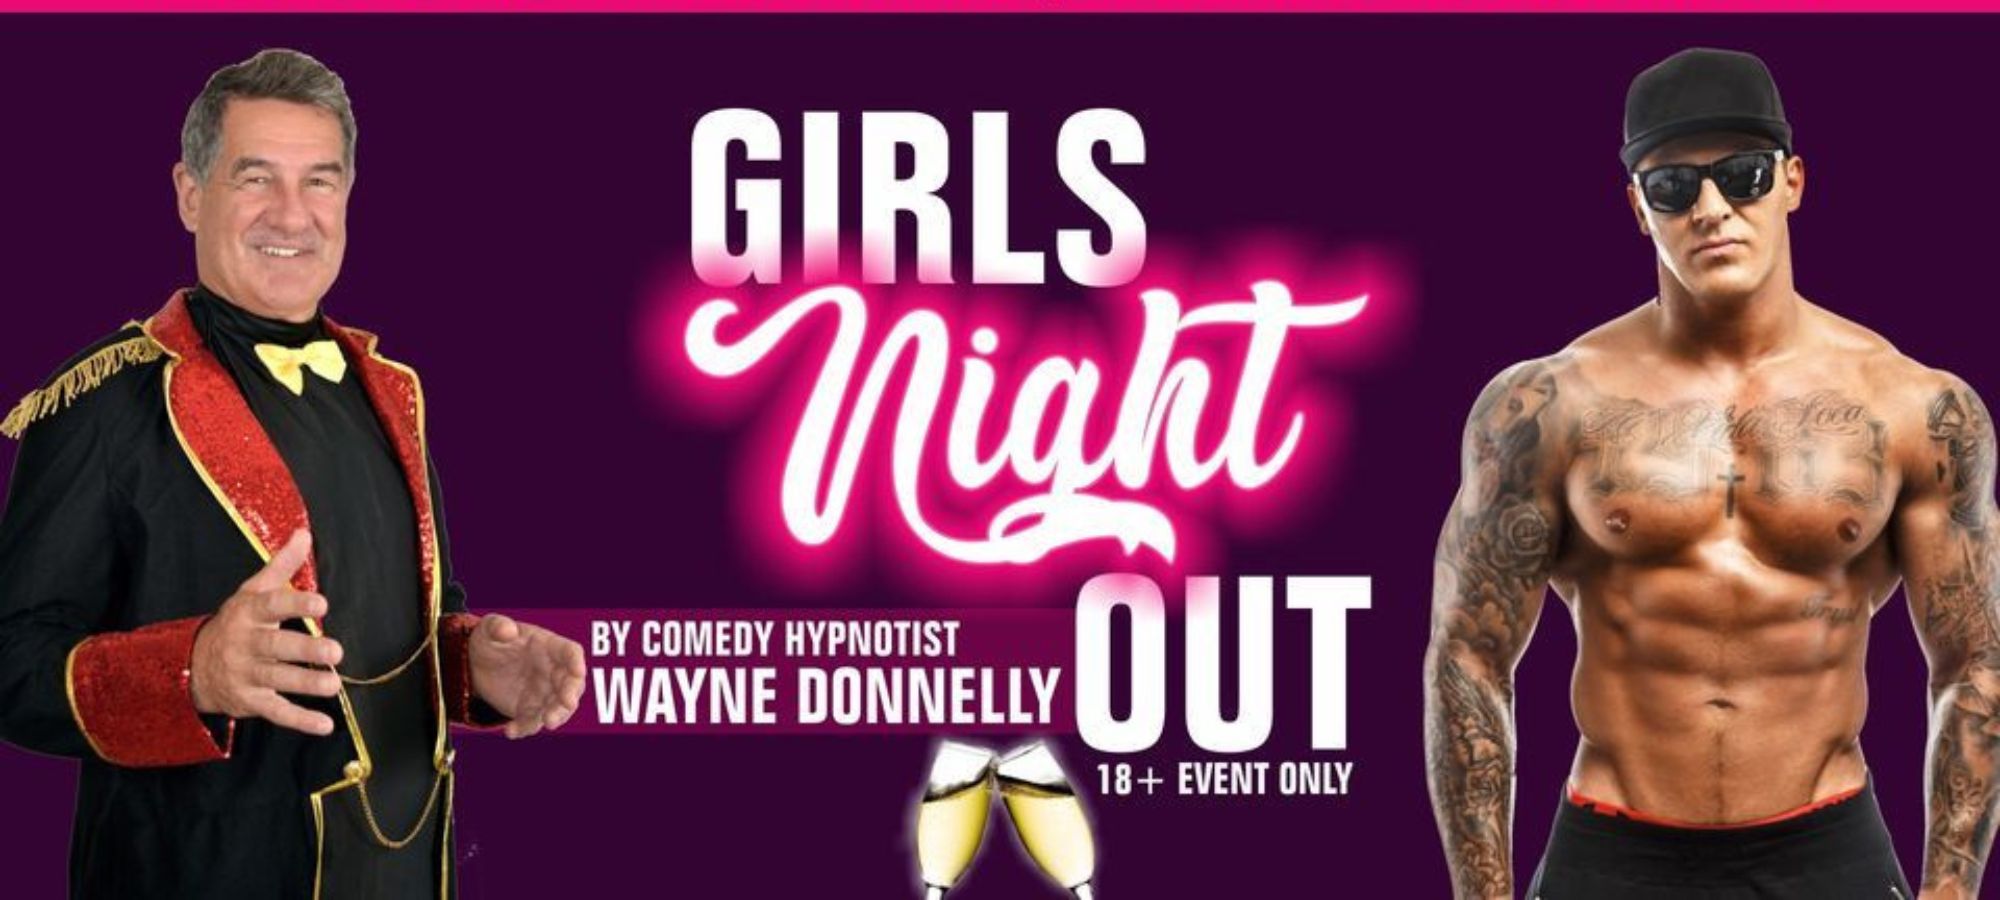 Girls Night Out Comedy Hypnosis by Wayne Donnelly